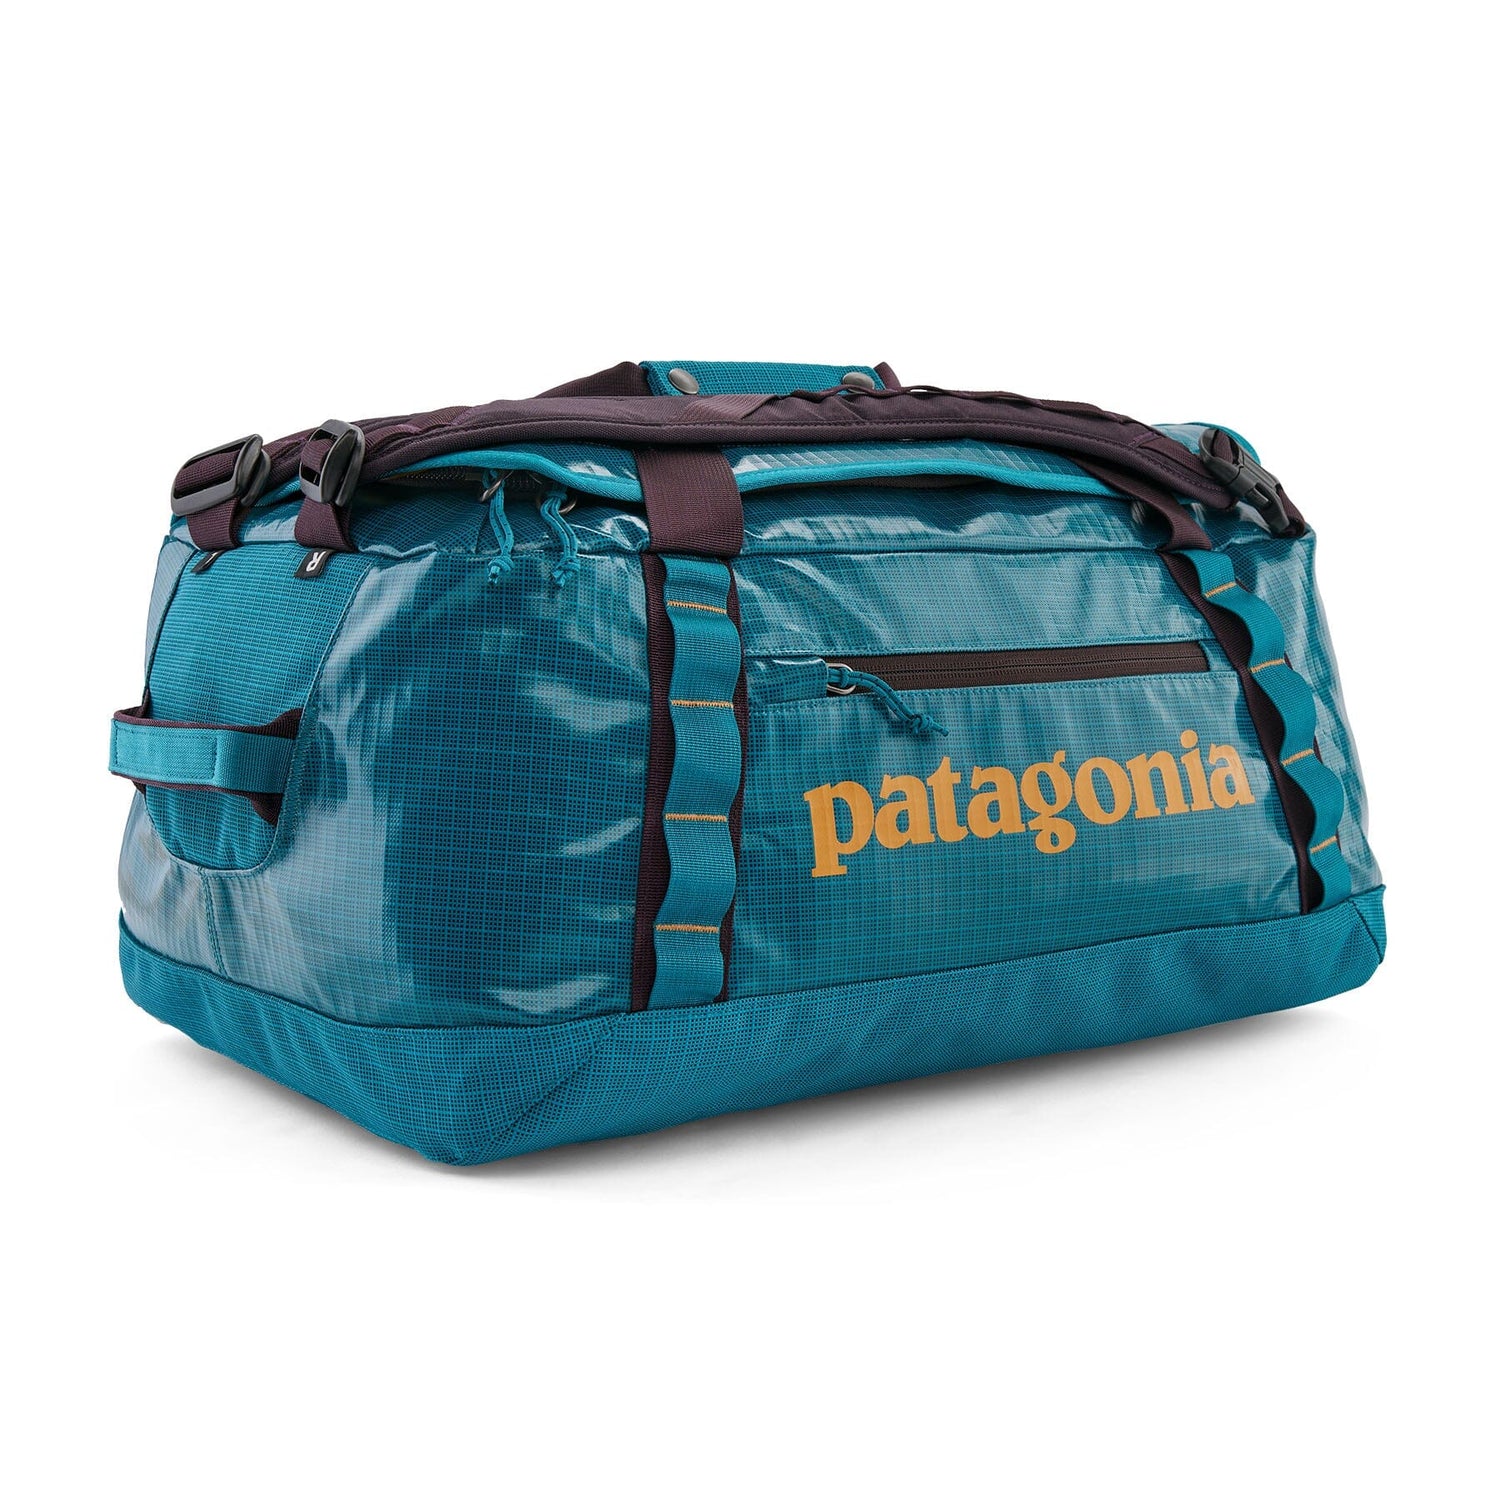 Patagonia Black Hole® Duffel Bag 40L - 100% Recycled Polyester Belay Blue Bags